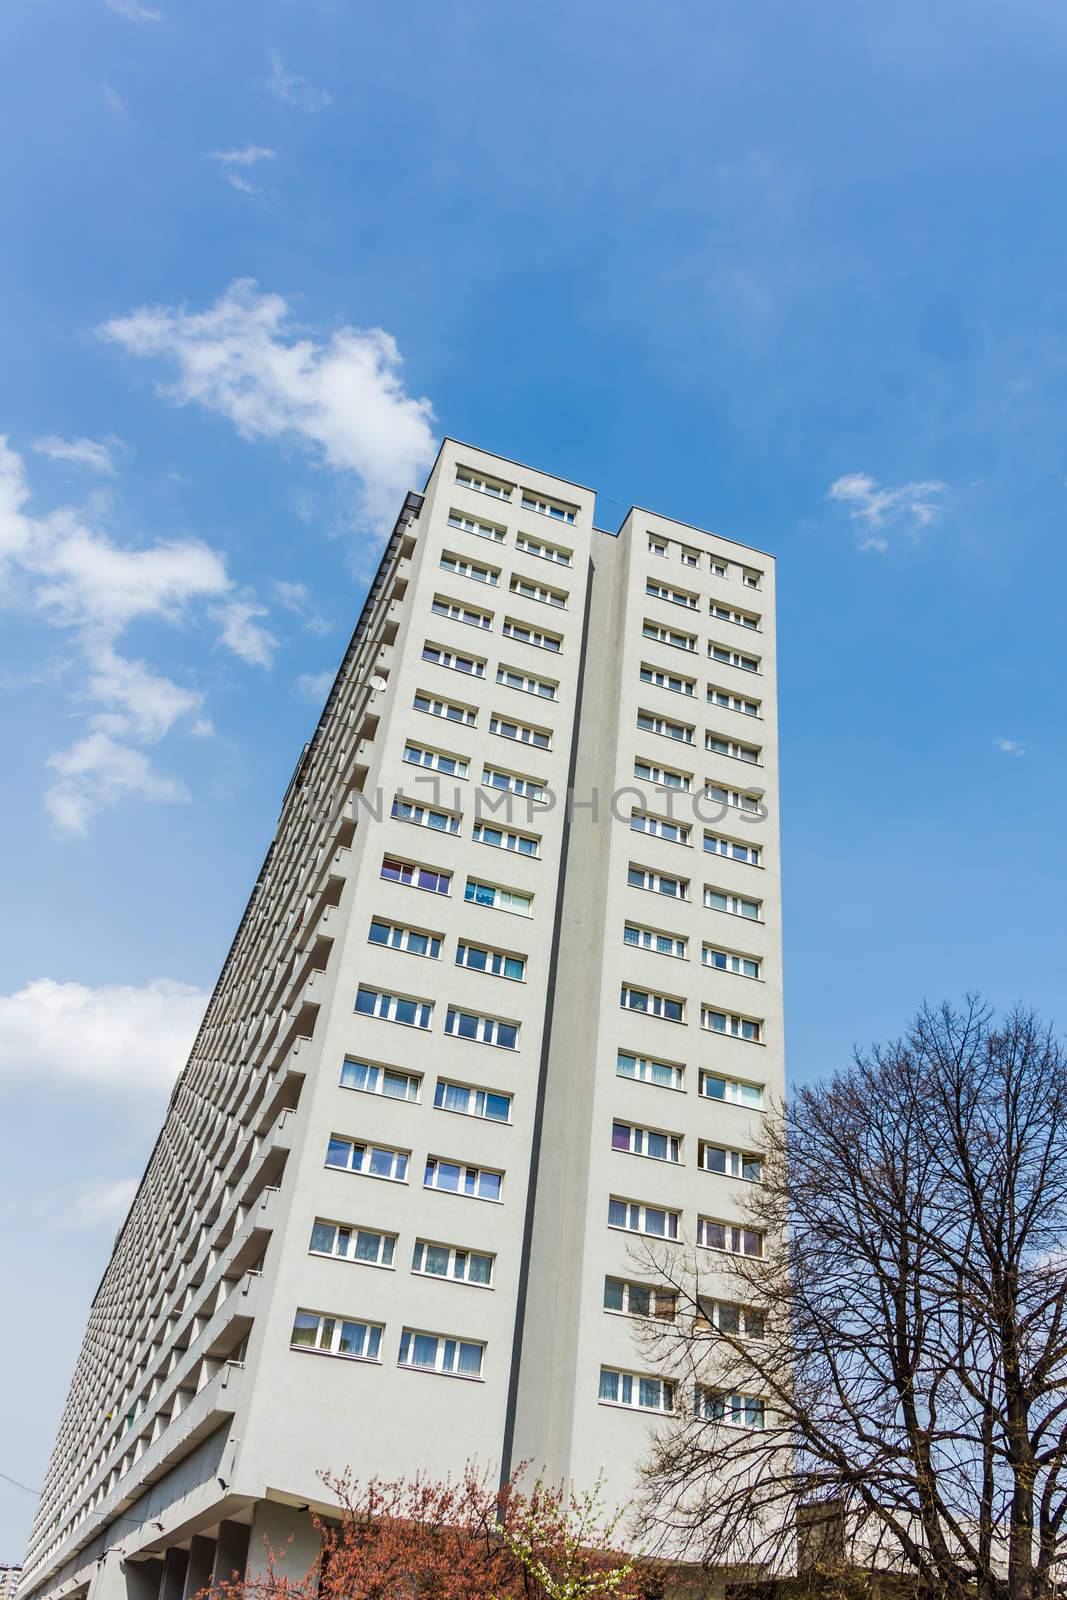 Residential block called "Superjednostka" (Super unit) in Katowice, Silesia region, Poland. Built in 1972, structure is considered one of the biggest residential buildings in Poland.